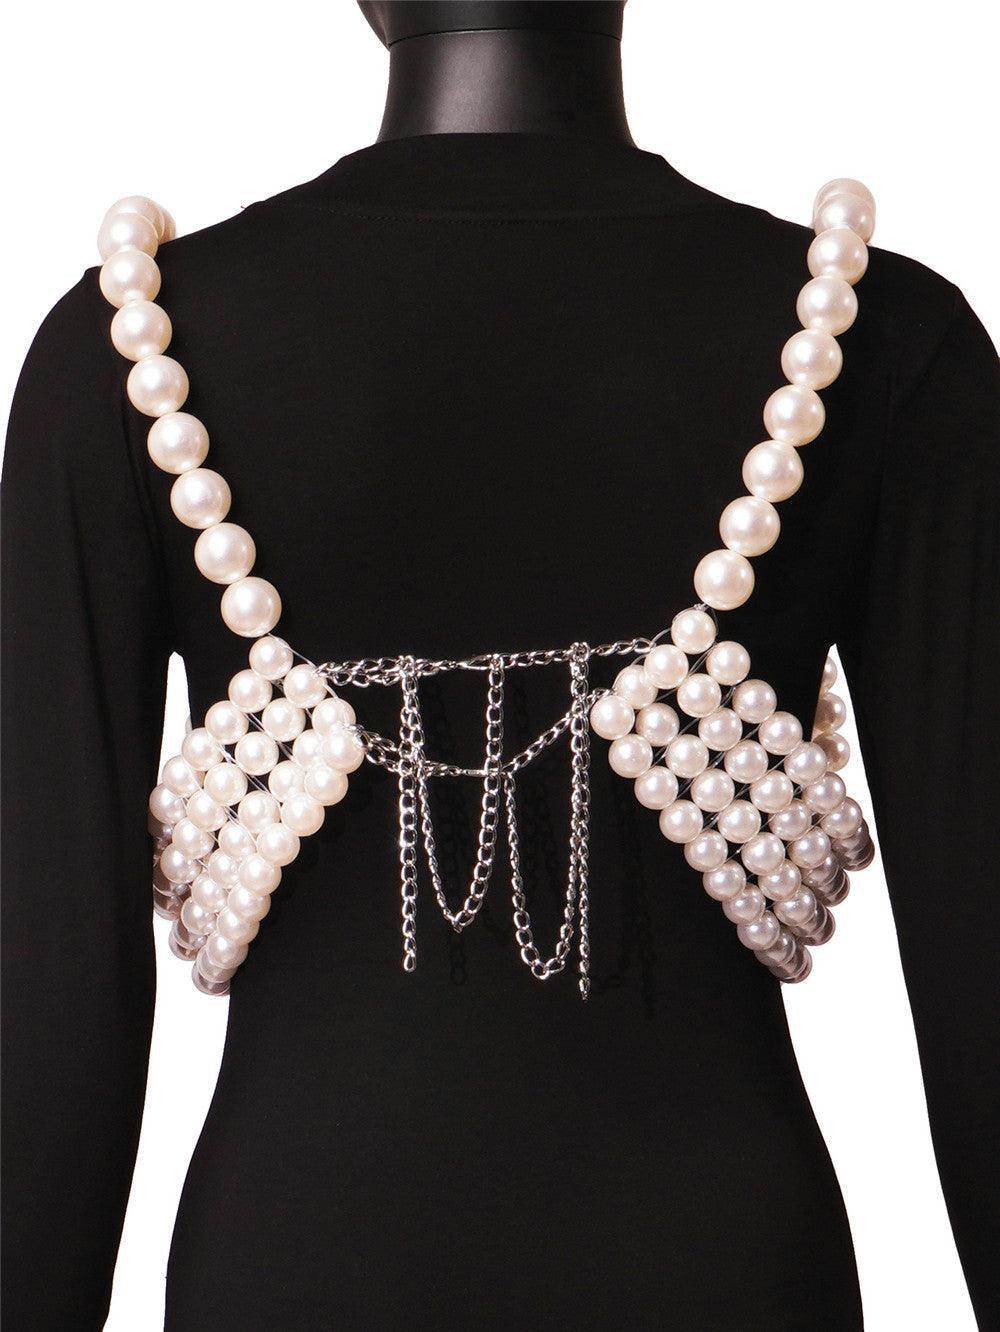 Tammy Pearl Beads Crop Top from The House of CO-KY - Shirts & Tops